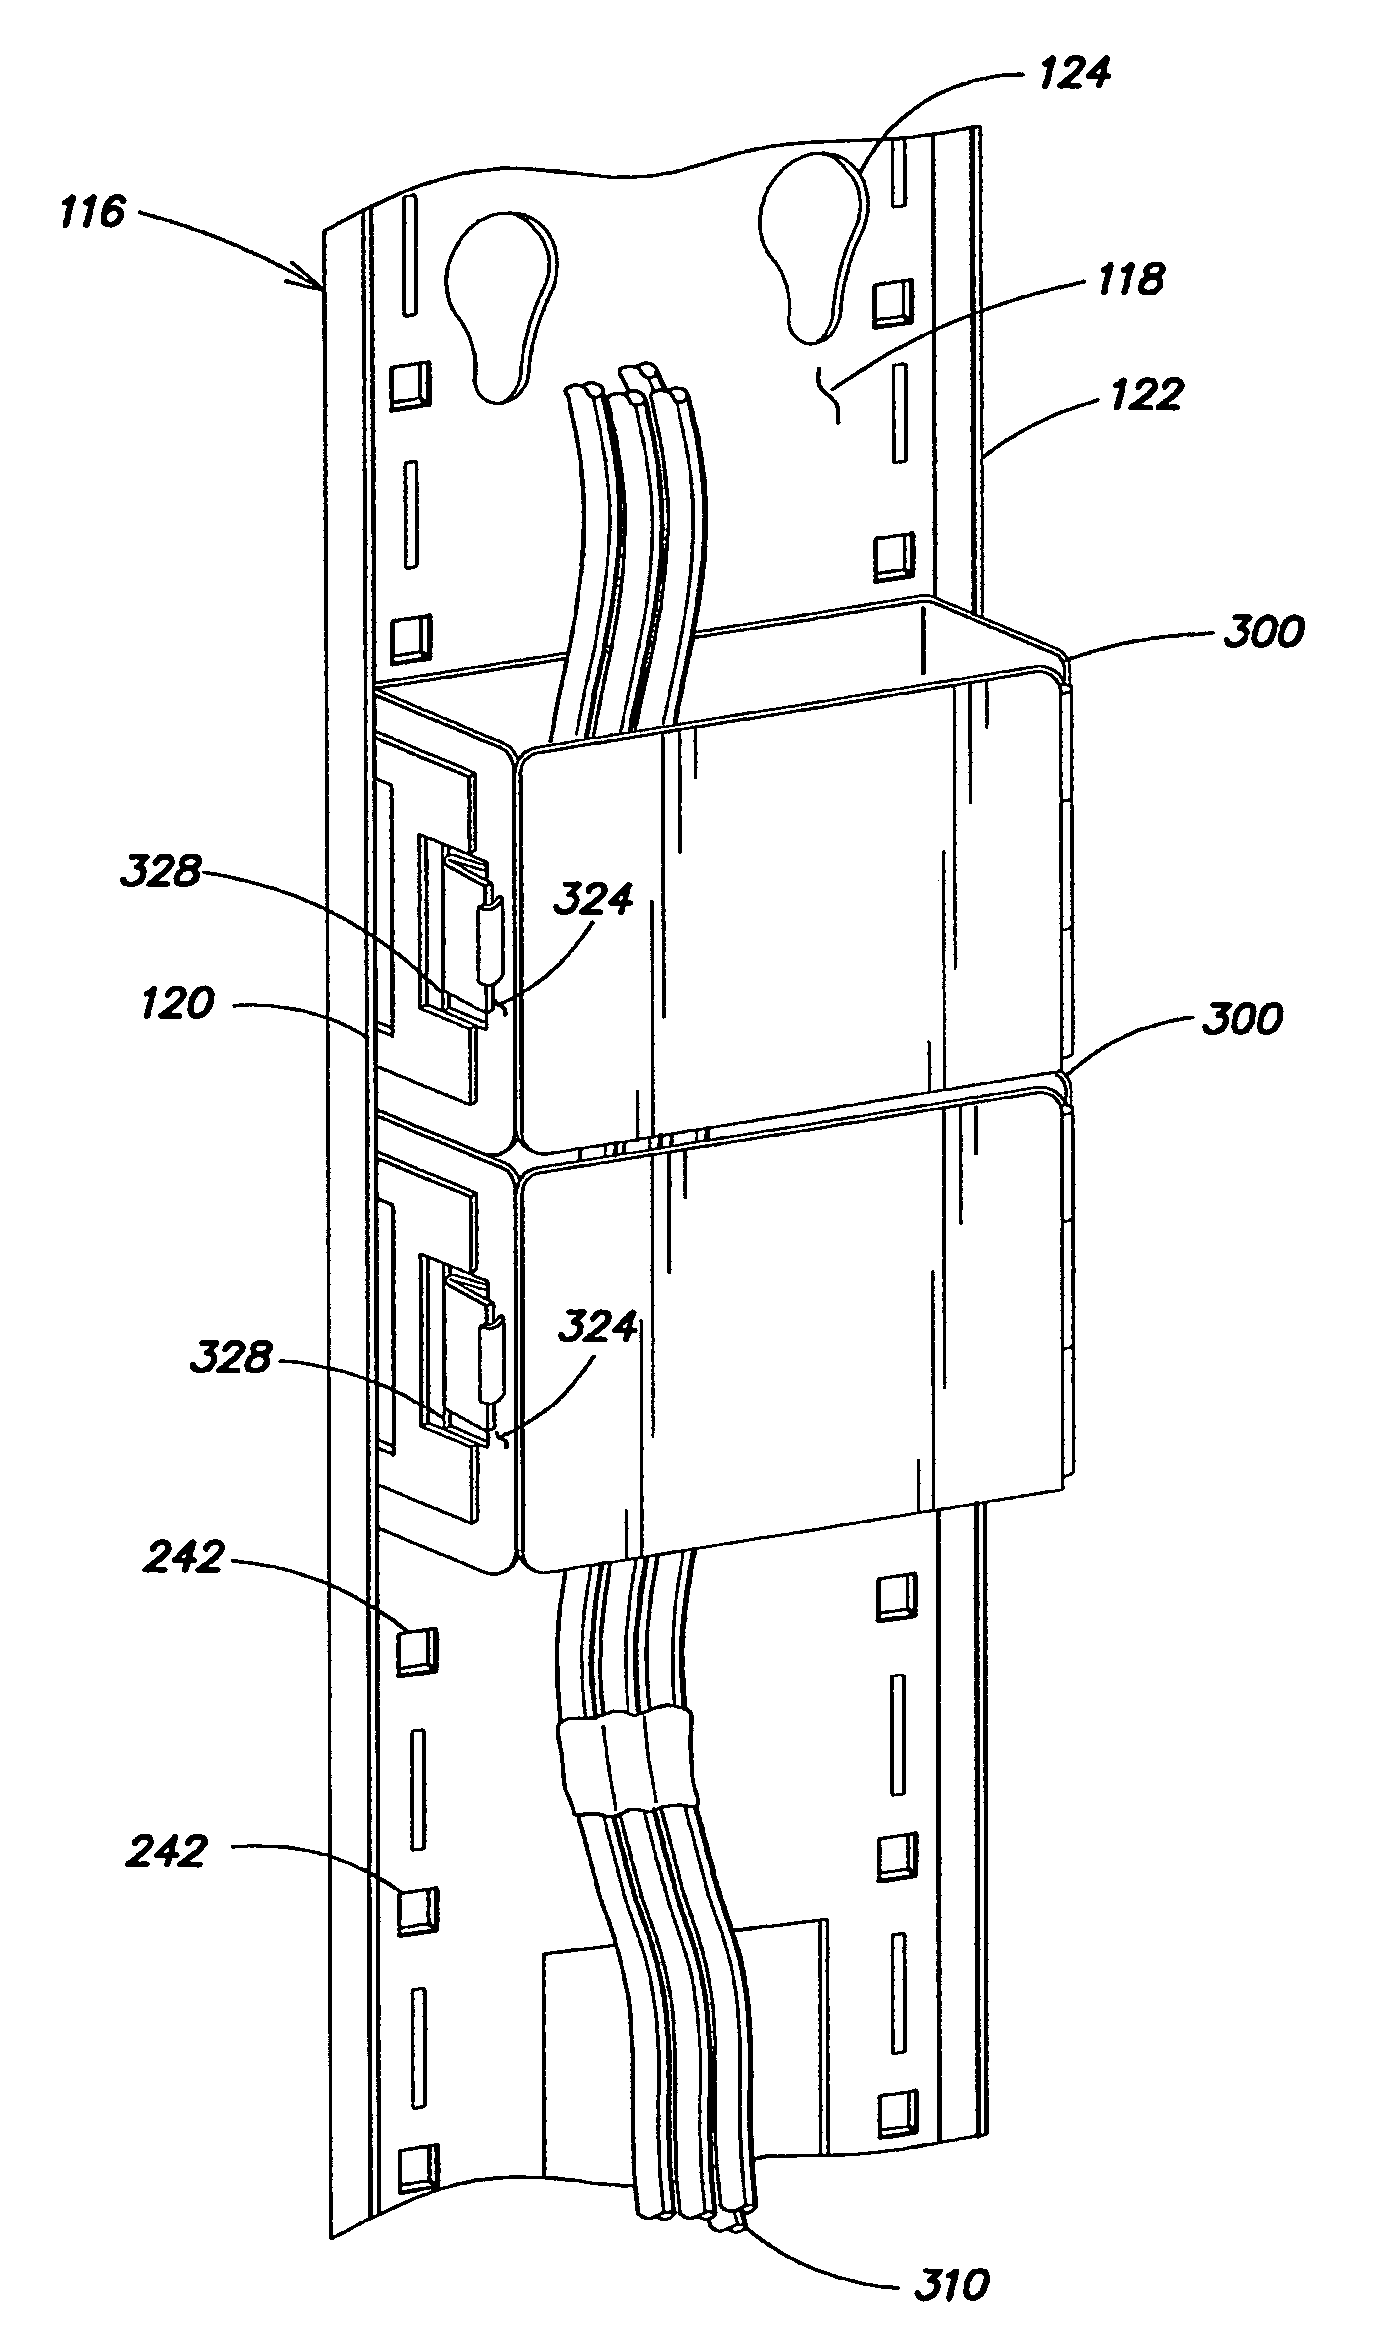 Equipment enclosure kit and assembly method